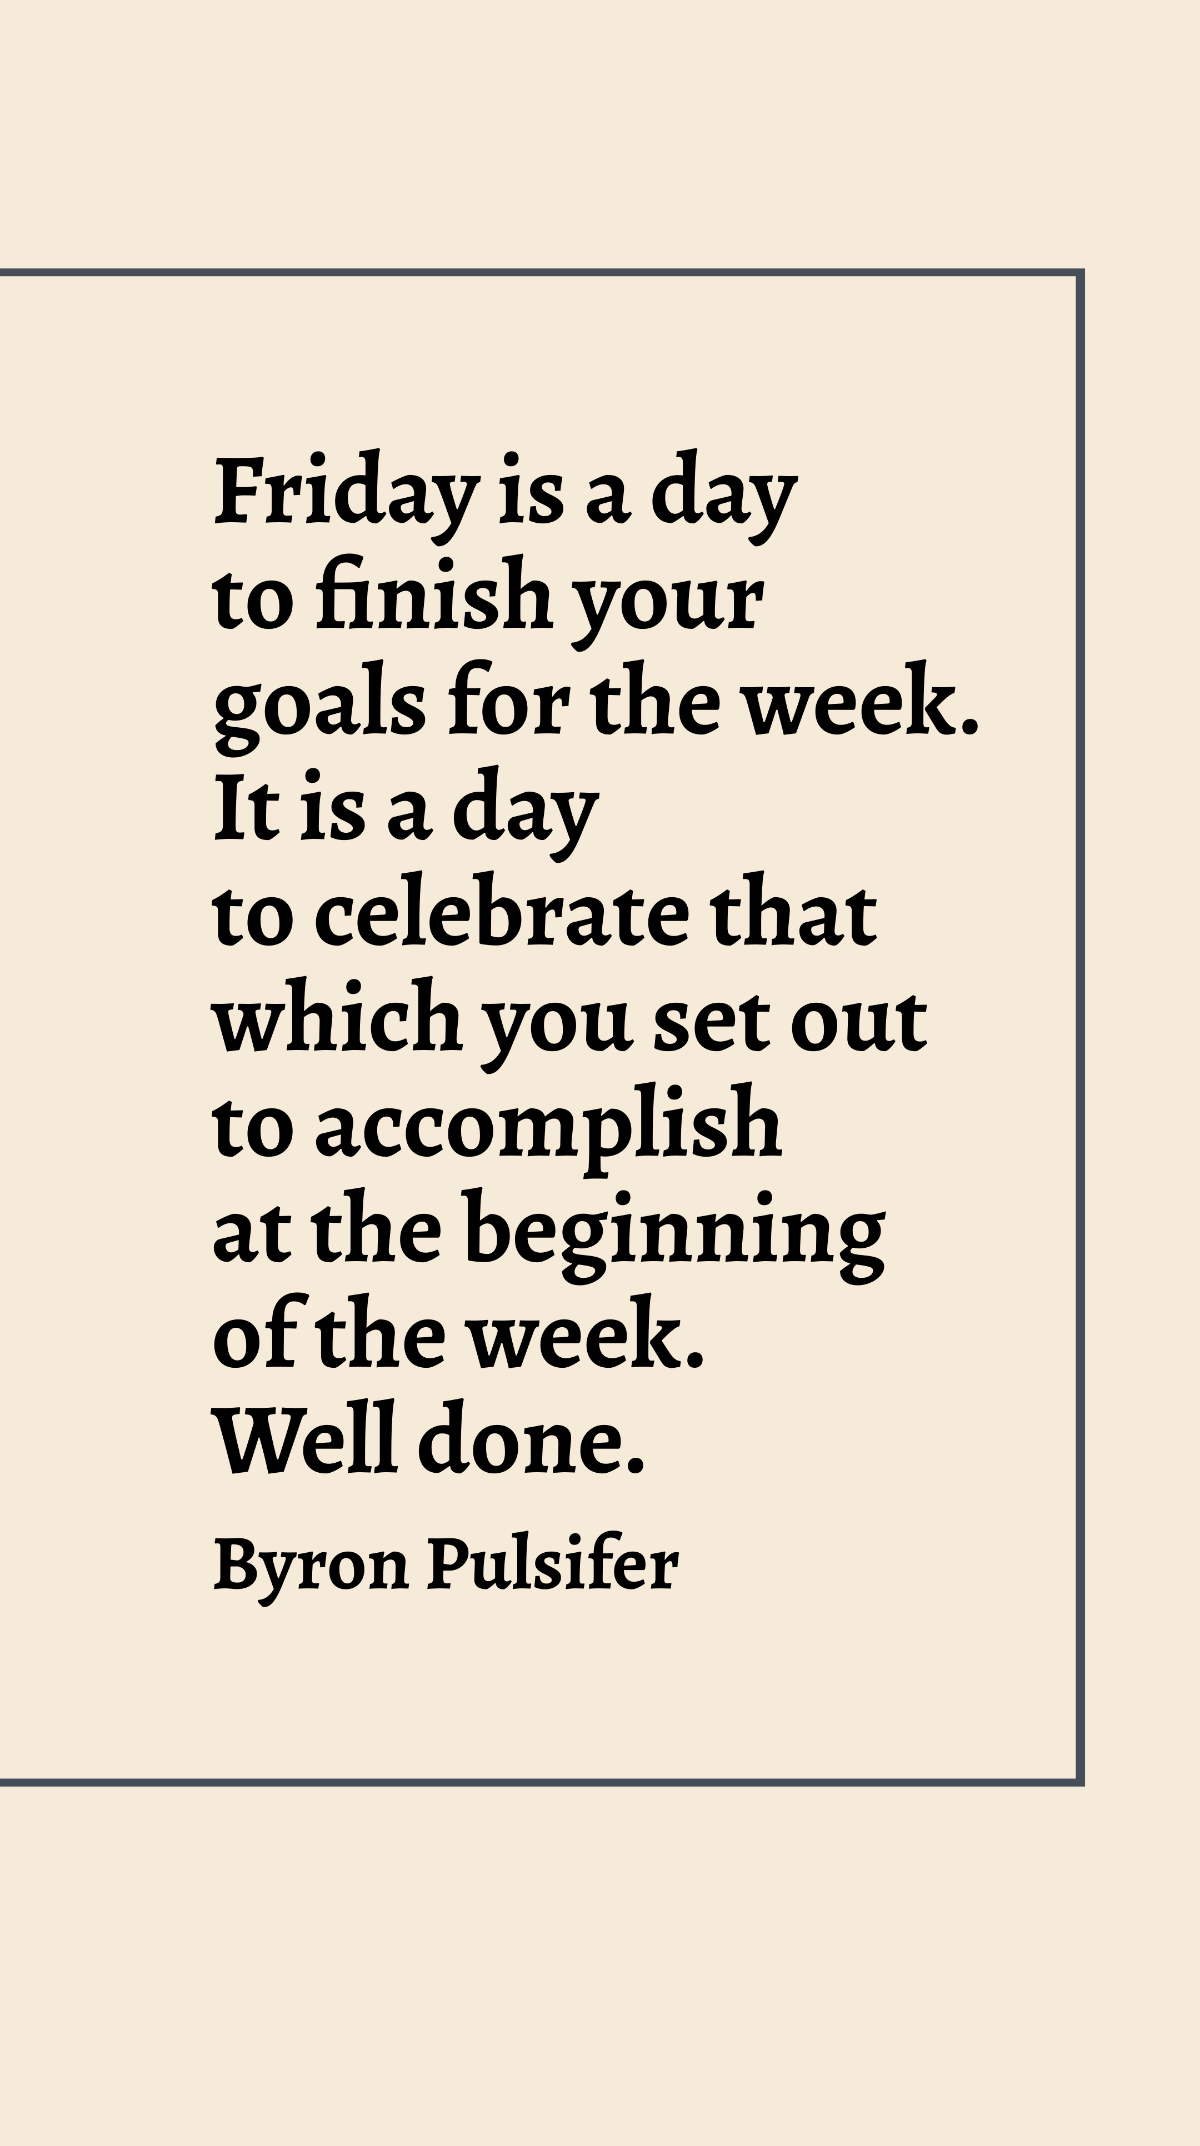 Free Byron Pulsifer - Friday is a day to finish your goals for the week. It is a day to celebrate that which you set out to accomplish at the beginning of the week. Well done. Template